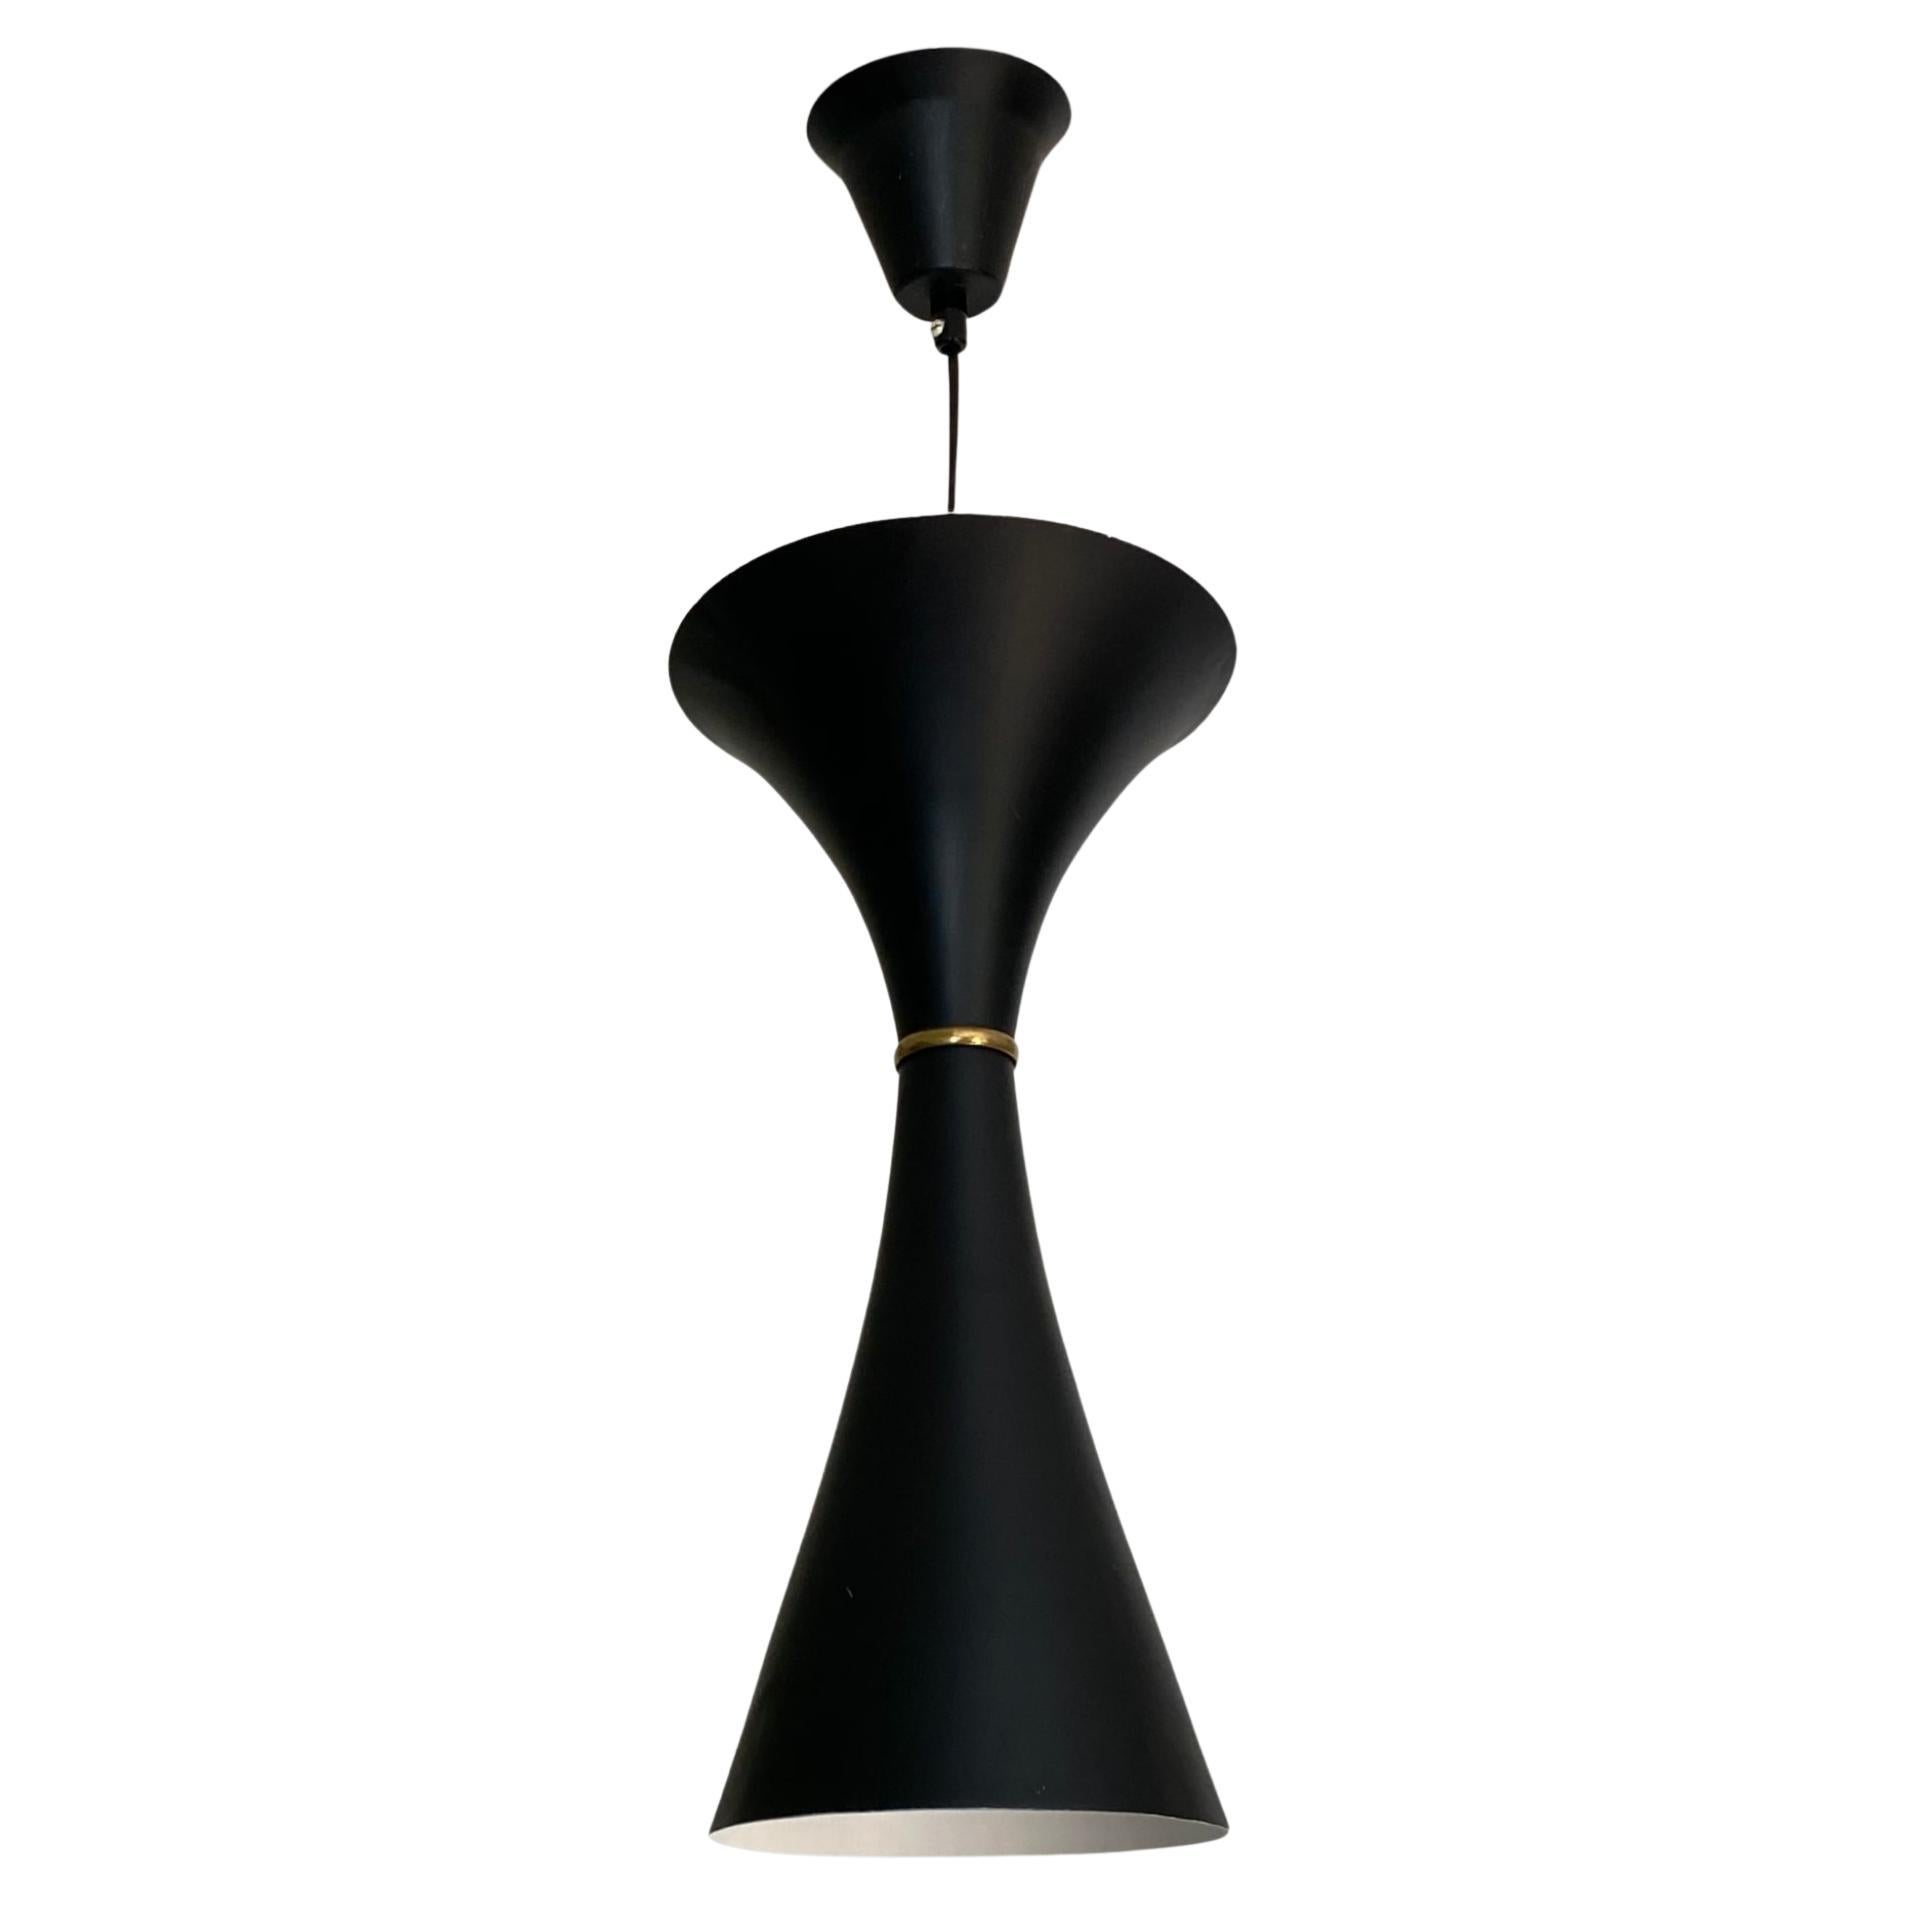 Hourglass shaped modernist pendant lamp attributed to ASEA, Sweden, 1950s For Sale